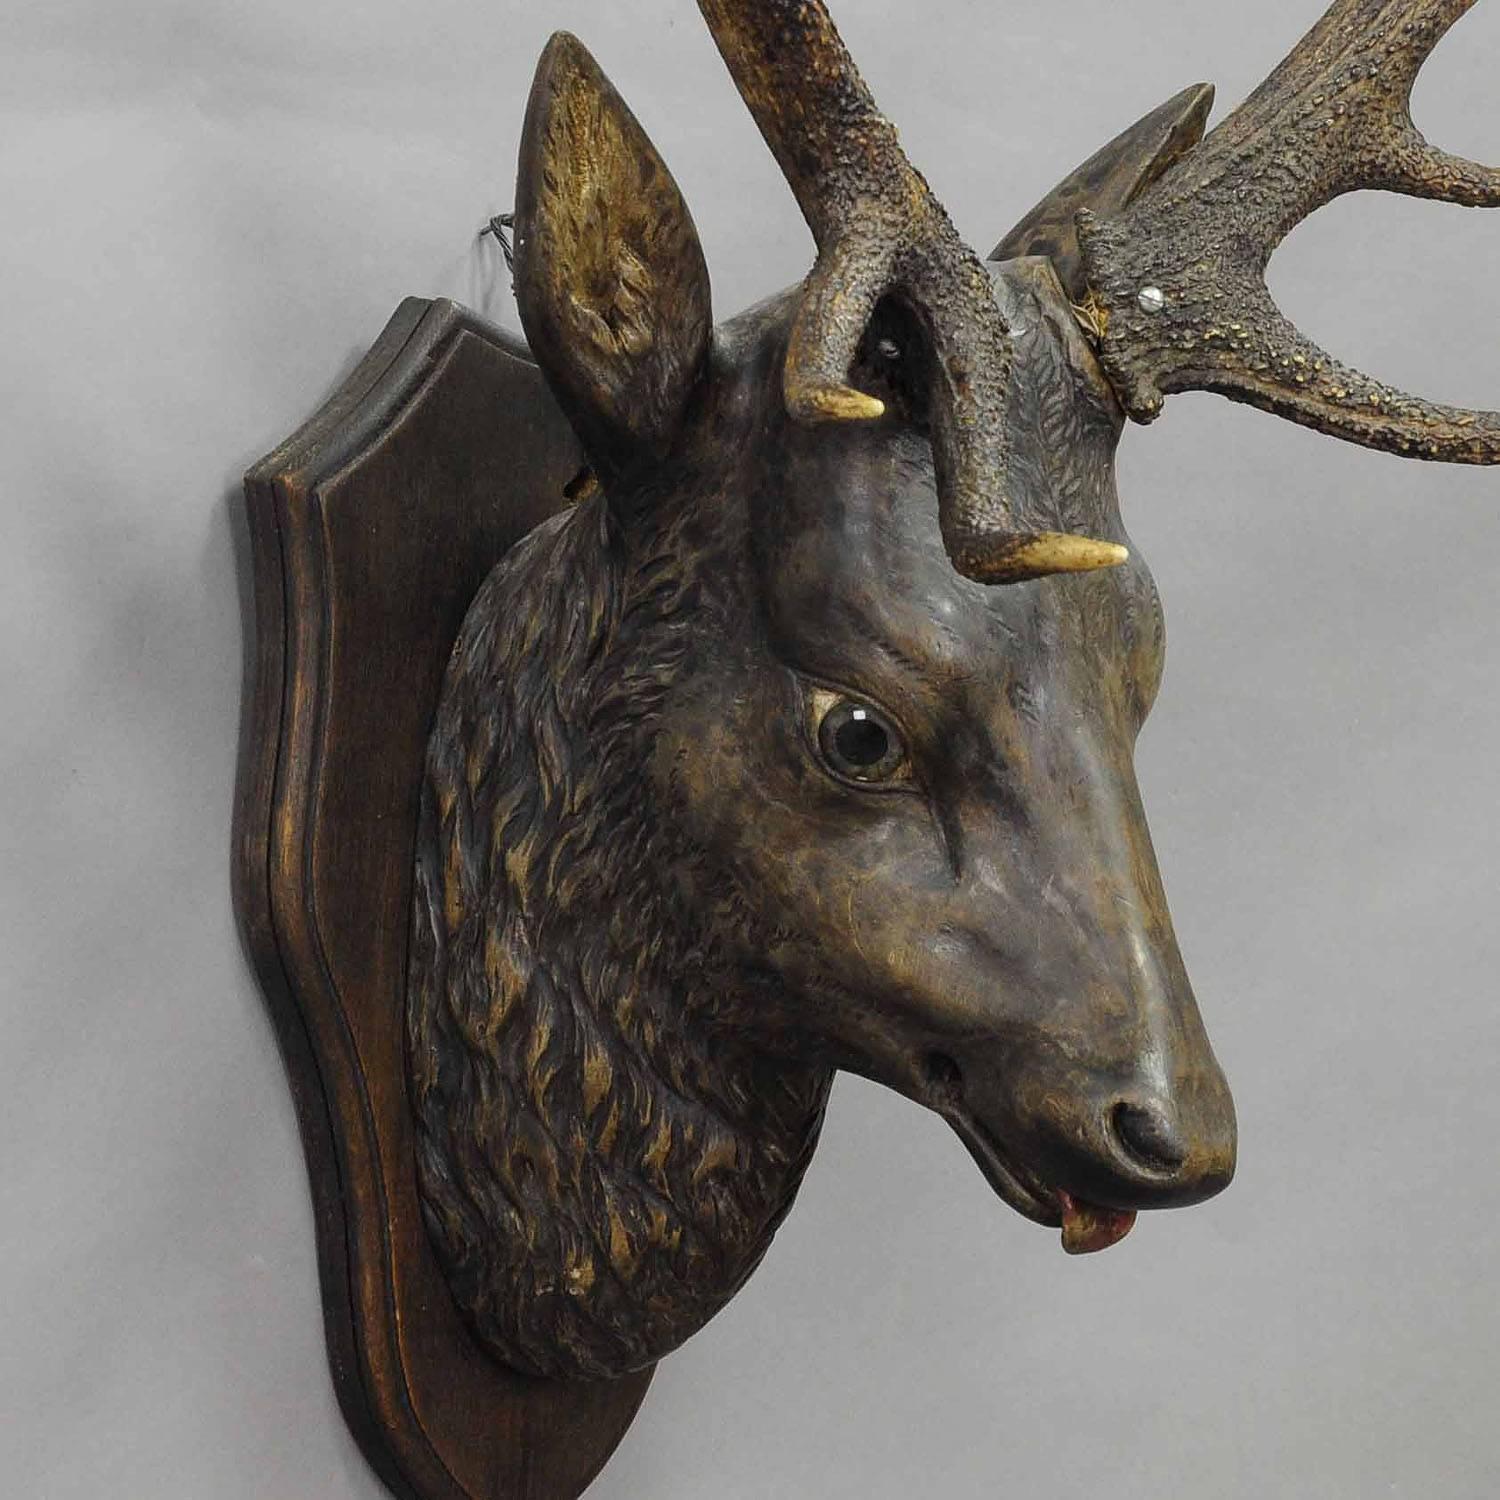 Rustic Antique Wooden Carved Stag Head with Real Antlers